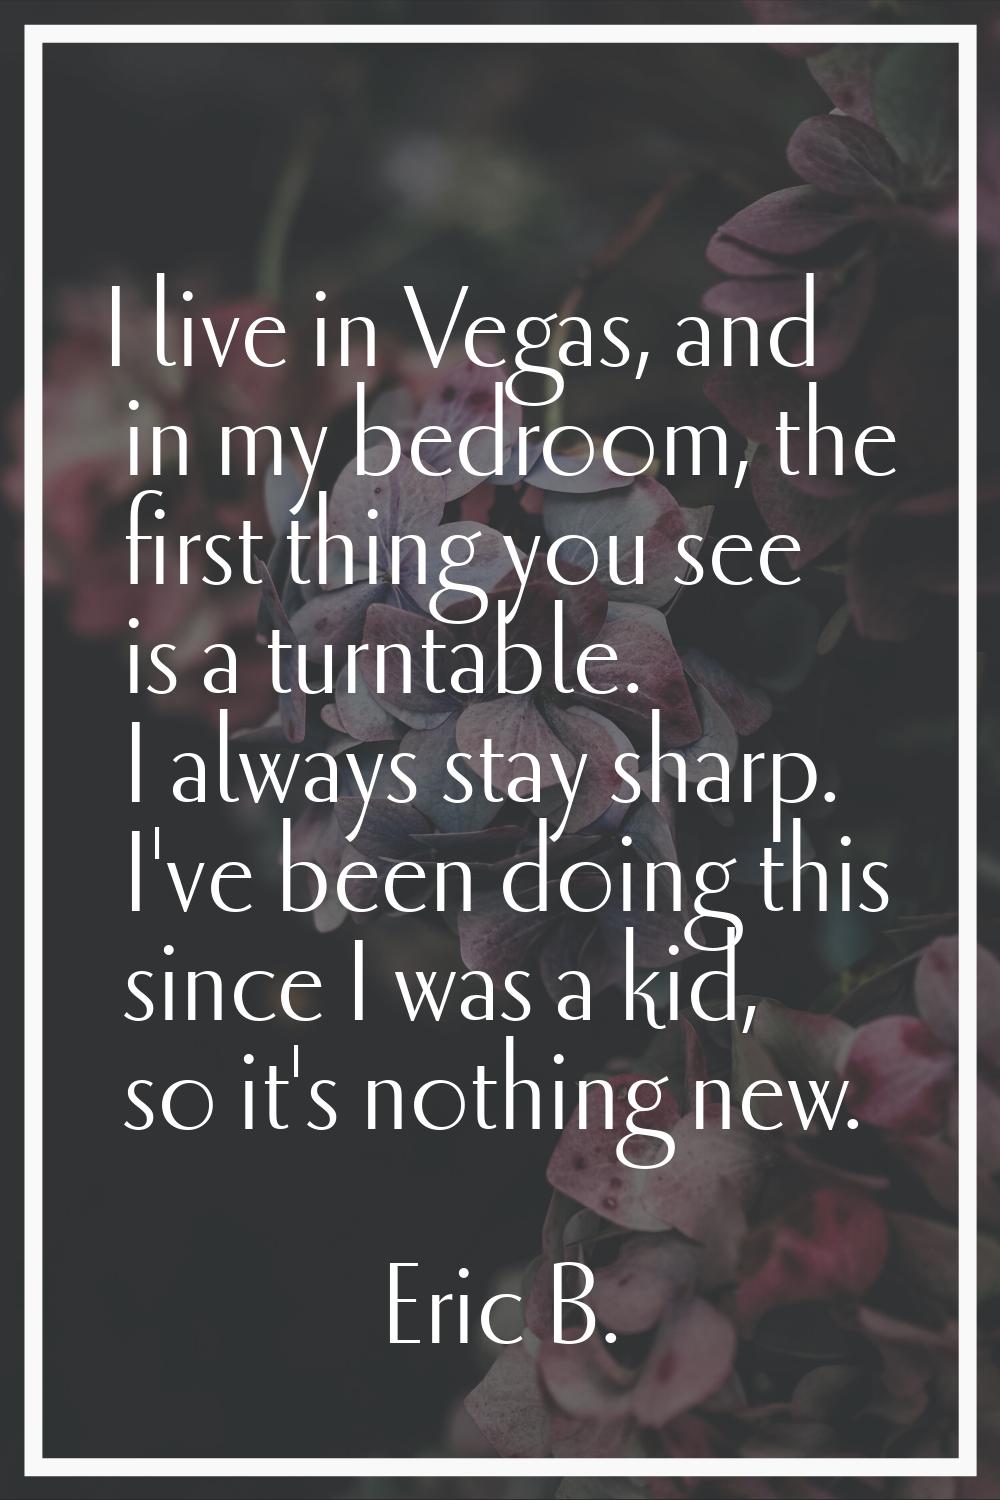 I live in Vegas, and in my bedroom, the first thing you see is a turntable. I always stay sharp. I'